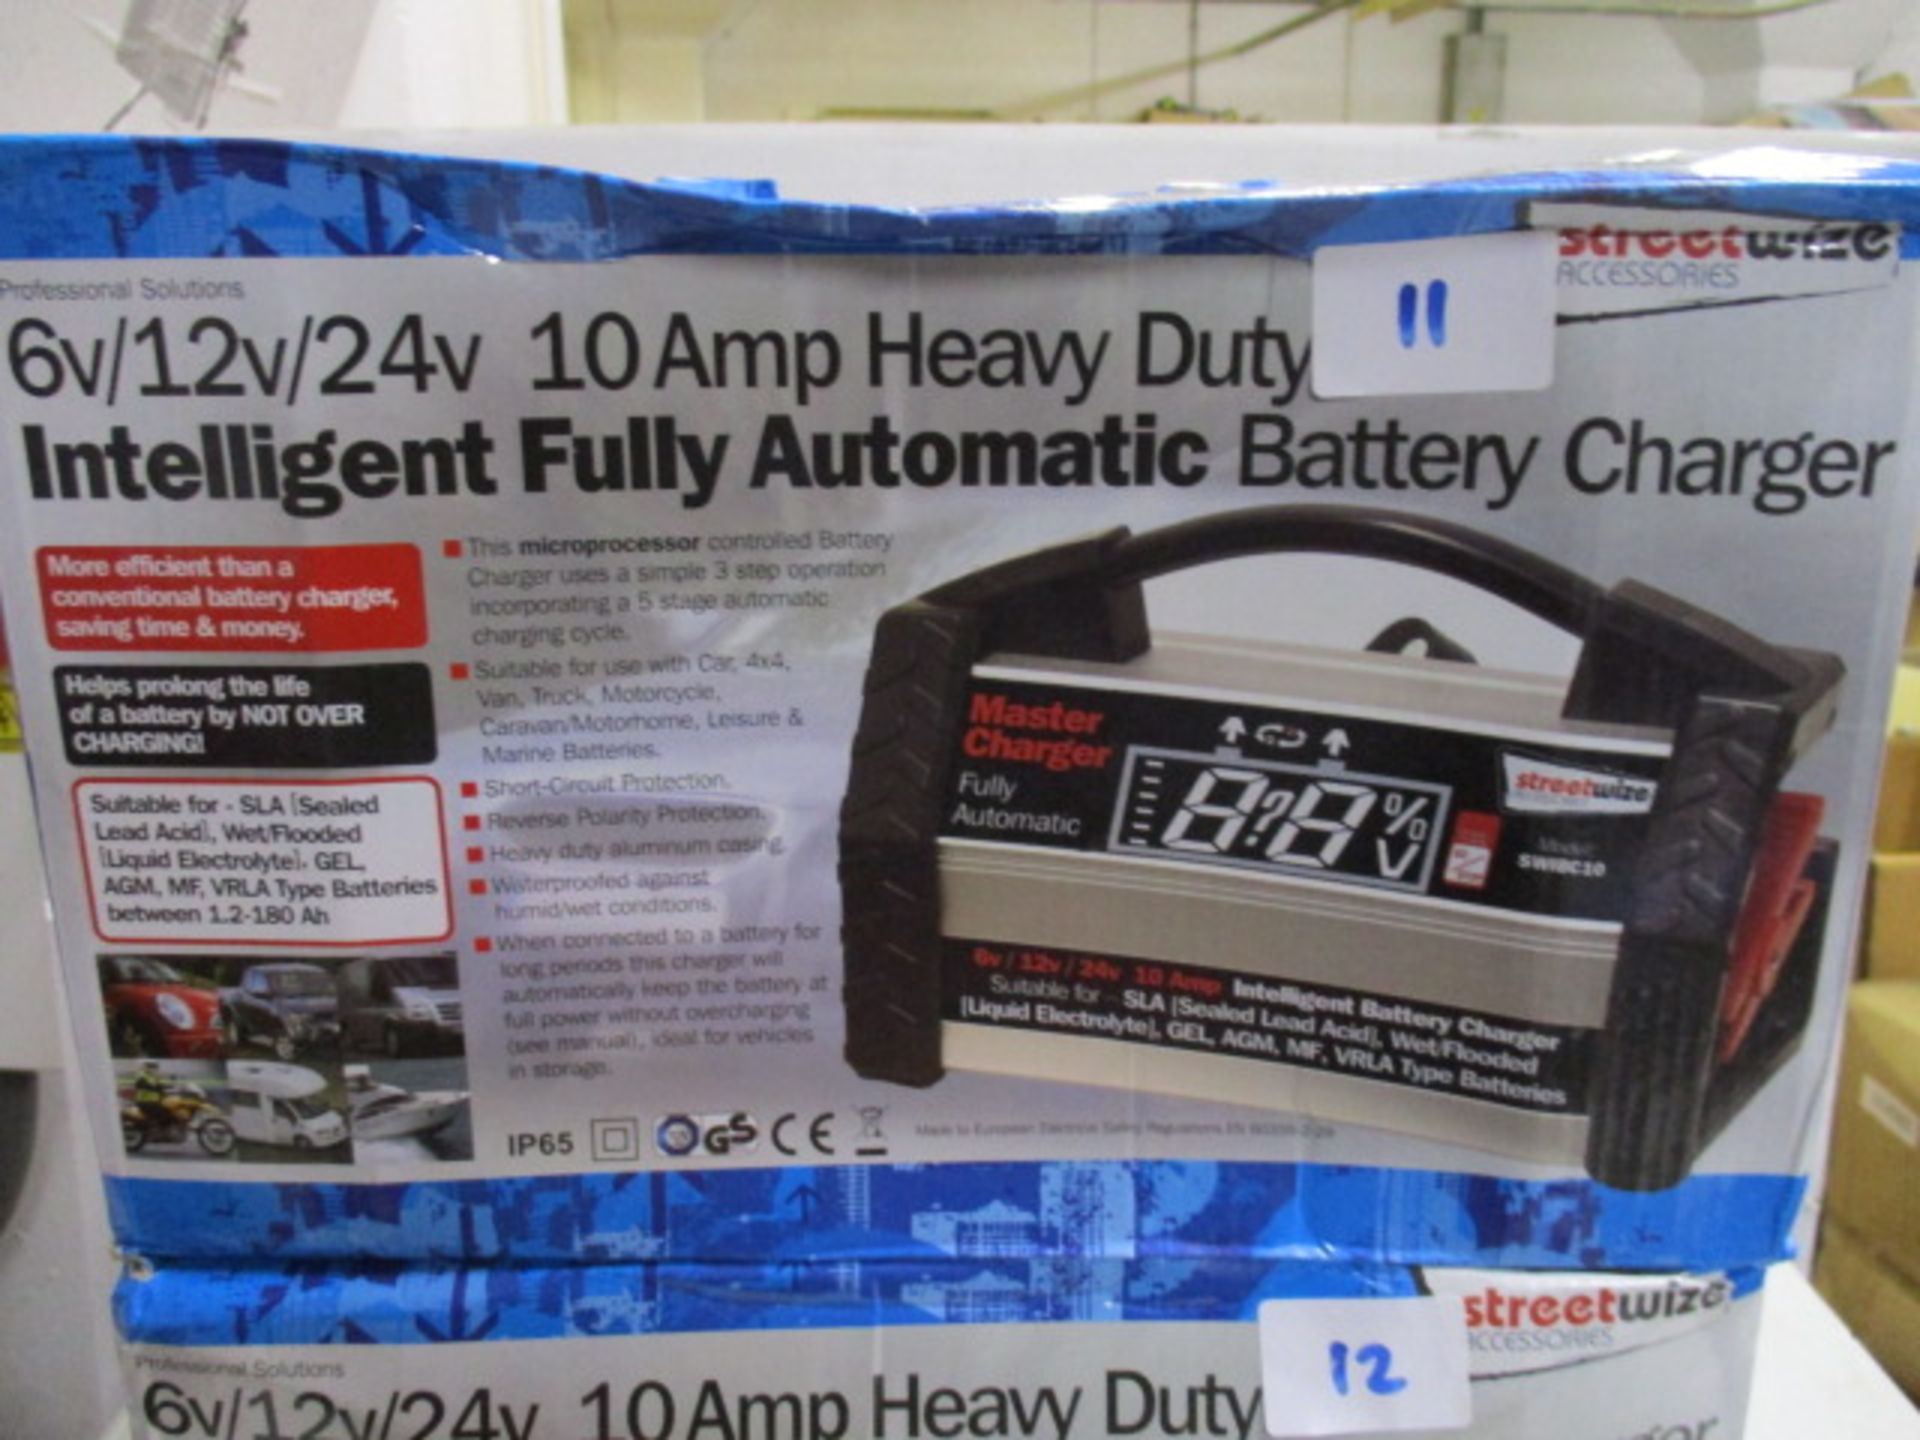 Brand new Streetwize 6/12/24V 10 amp heavy duty intelligent fully automatic battery charger Model: